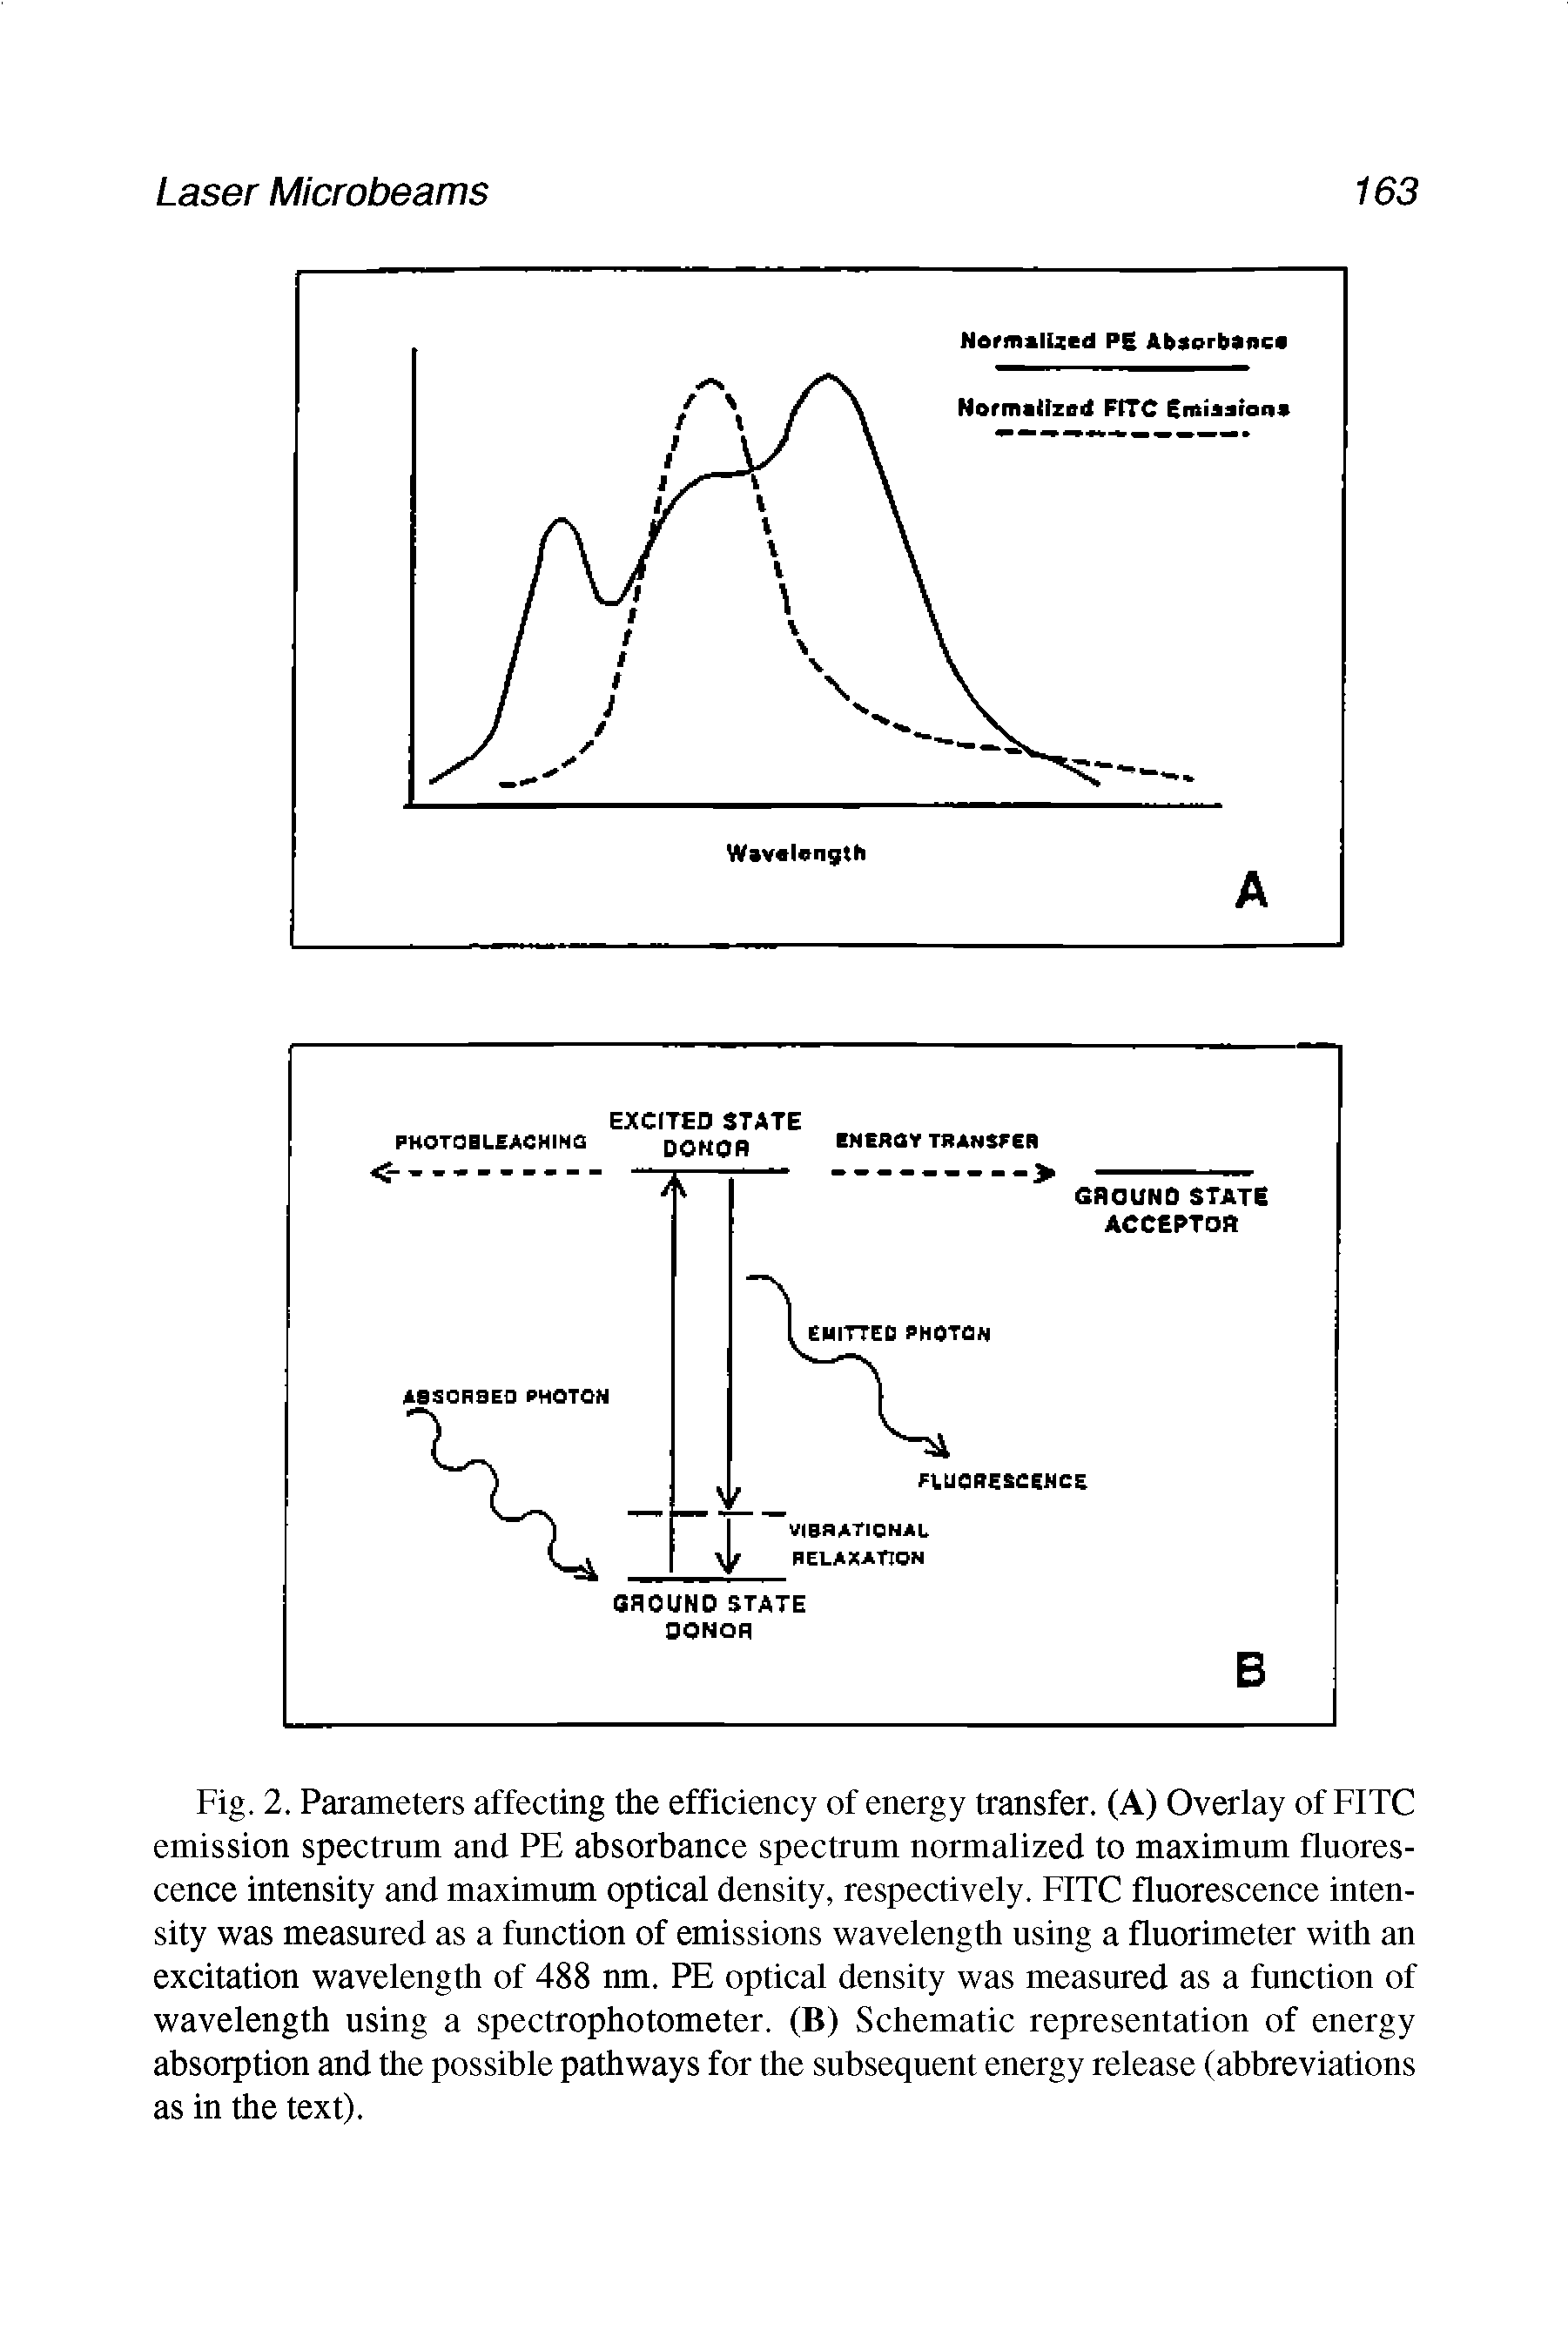 Fig. 2. Parameters affecting the efficiency of energy transfer. (A) Overlay of FITC emission spectrum and PE absorbance spectrum normalized to maximum fluorescence intensity and maximum optical density, respectively. FITC fluorescence intensity was measured as a function of emissions wavelength using a fluorimeter with an excitation wavelength of 488 nm. PE optical density was measured as a function of wavelength using a spectrophotometer. (B) Schematic representation of energy absorption and the possible pathways for the subsequent energy release (abbreviations as in the text).